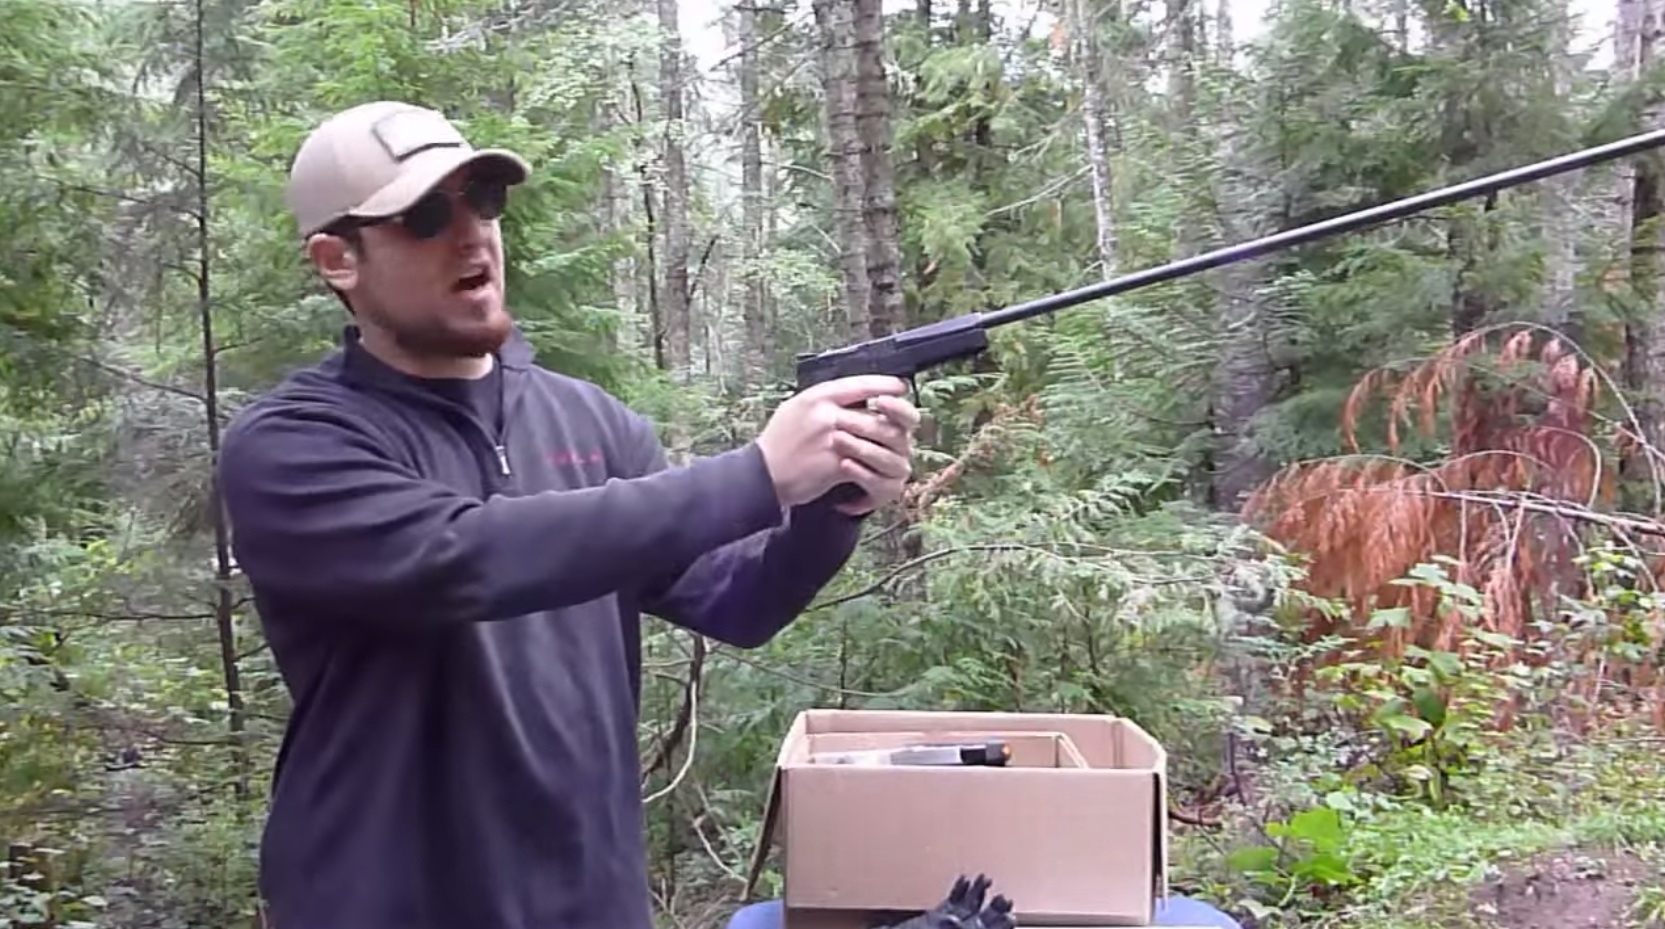 Video: Is This the Longest Pistol Barrel Ever Made?